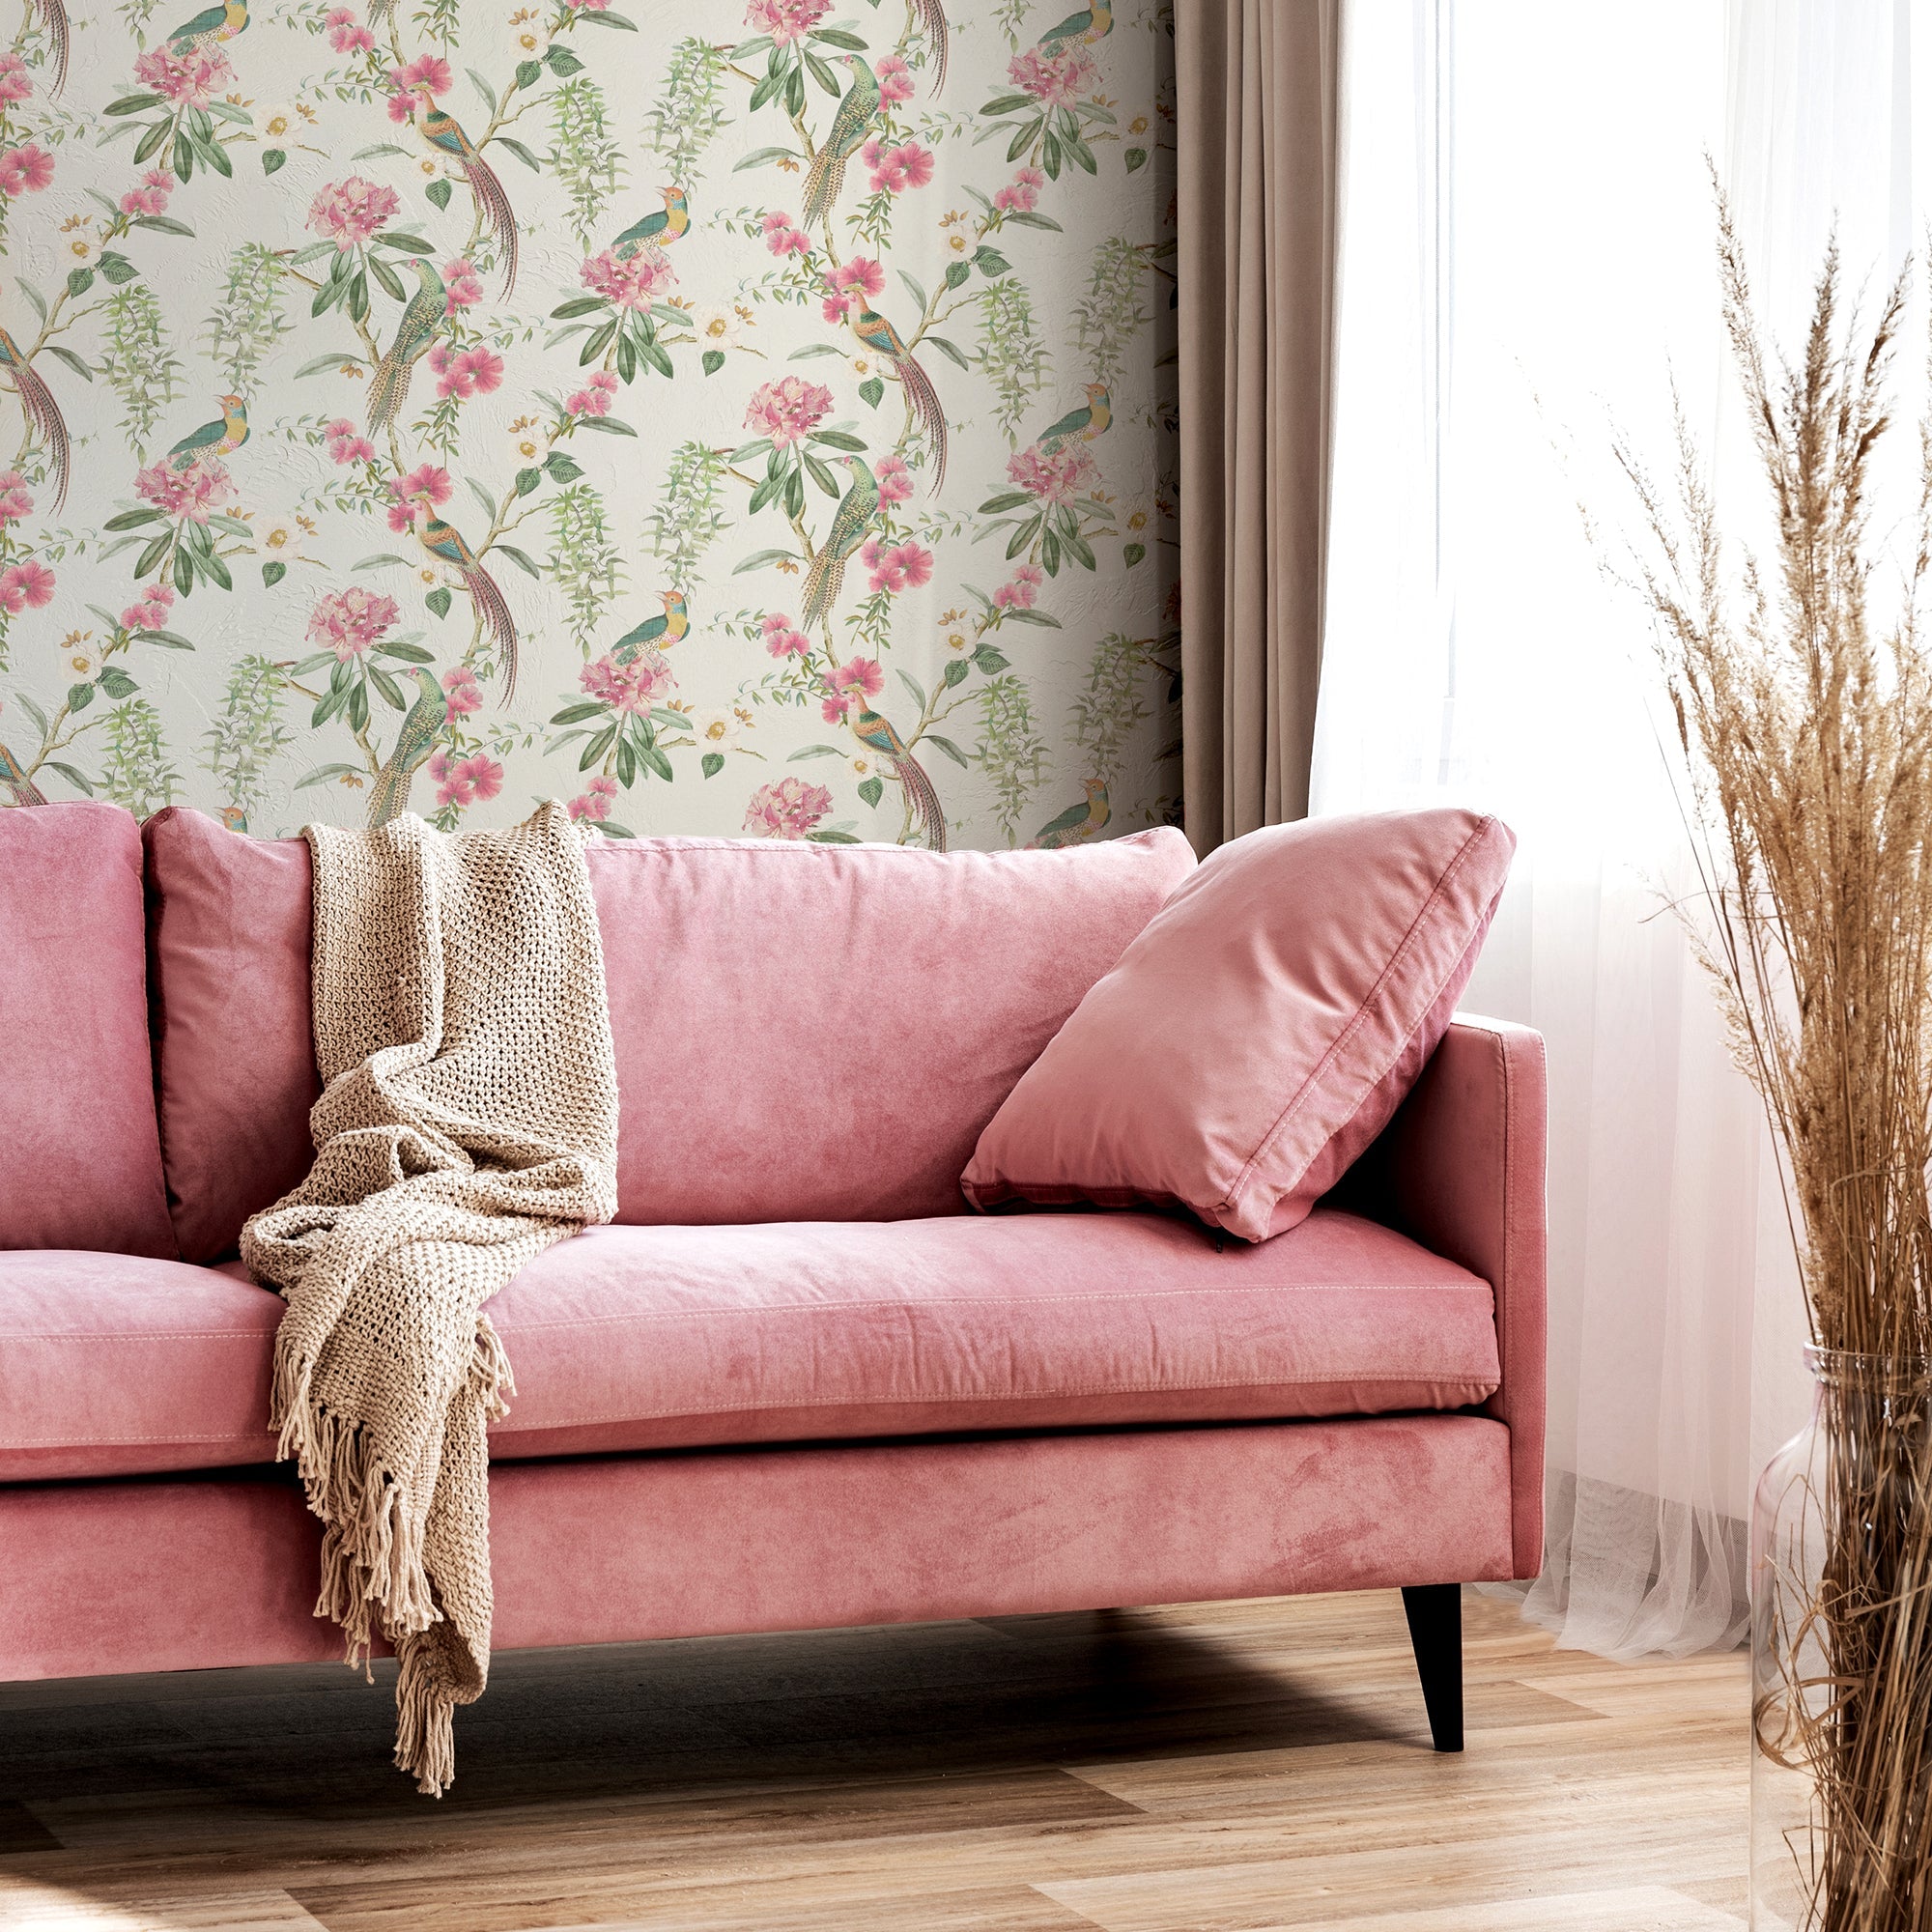 Exotic Garden Pink Green sw12 by Arthouse